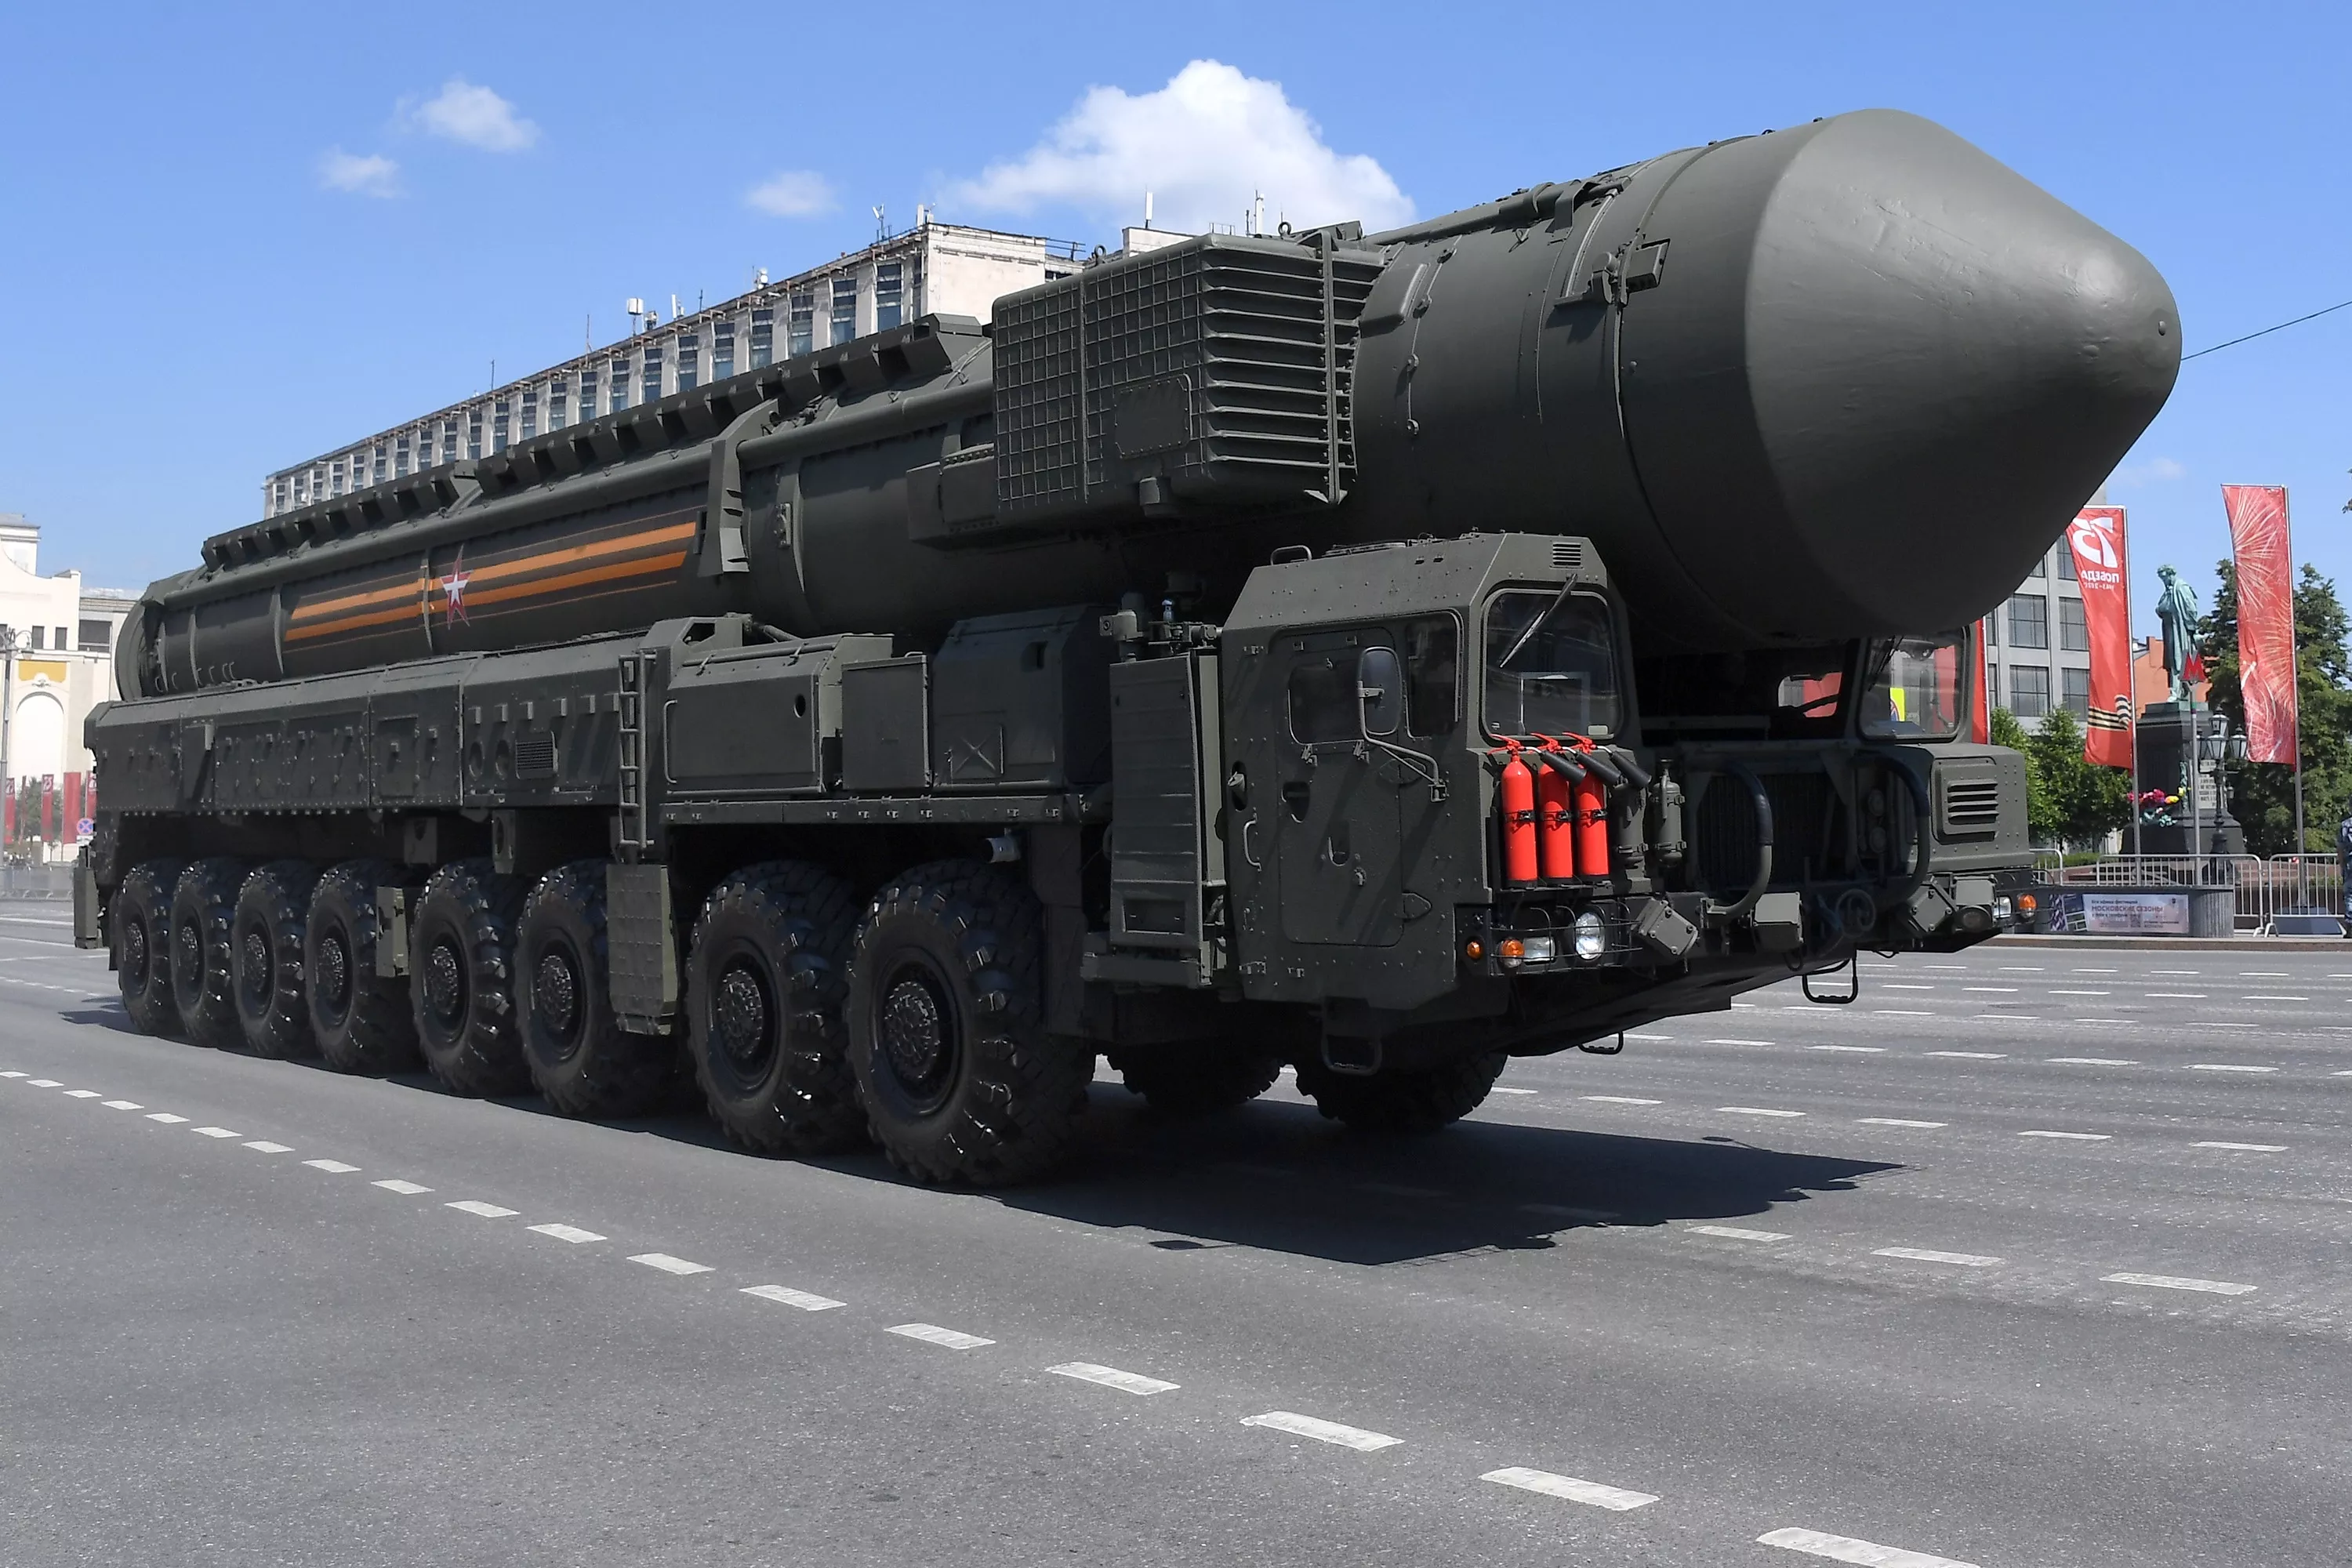 The Russians have launched the SS-27 Mod 2 intercontinental ballistic missile with a range of 12,000 kilometres, which can carry a nuclear warhead with a yield of up to 500 kilotons-7